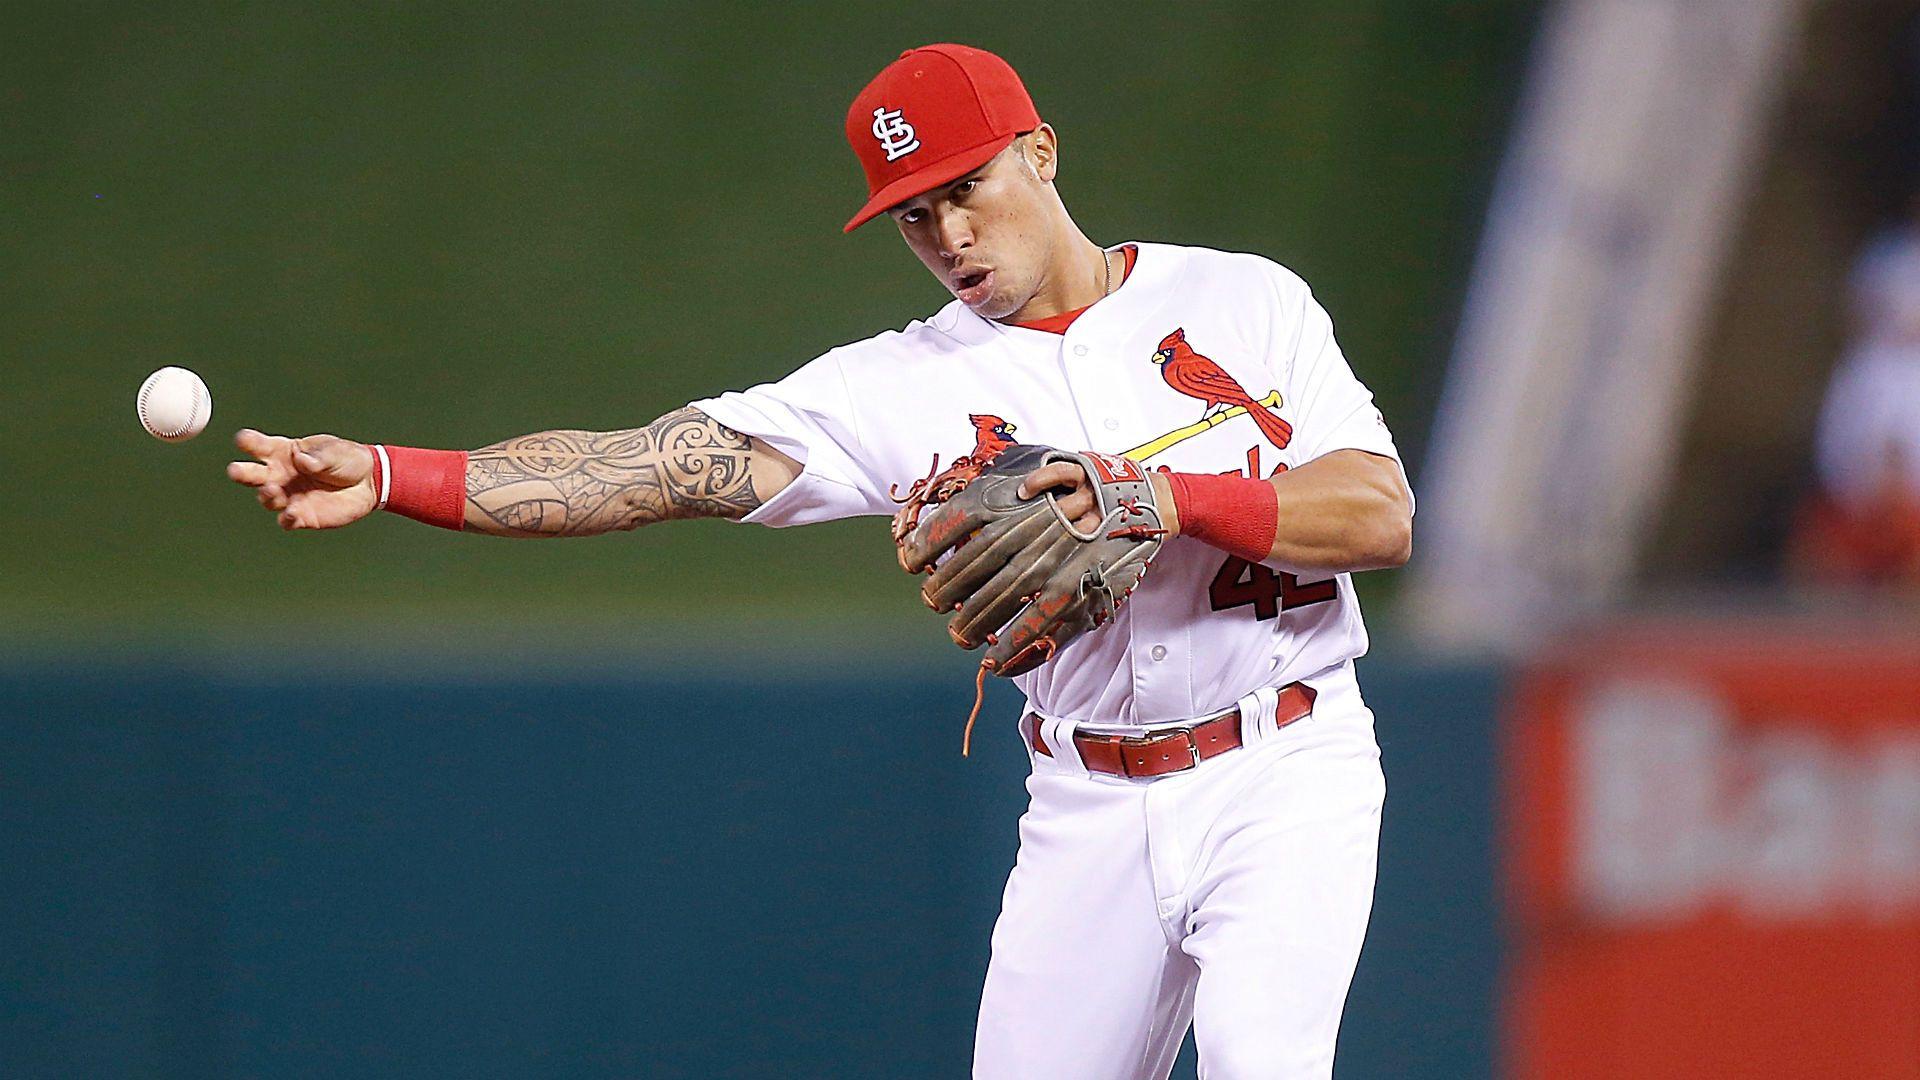 Kolten Wong backs off critical comments about Cardinals after losing